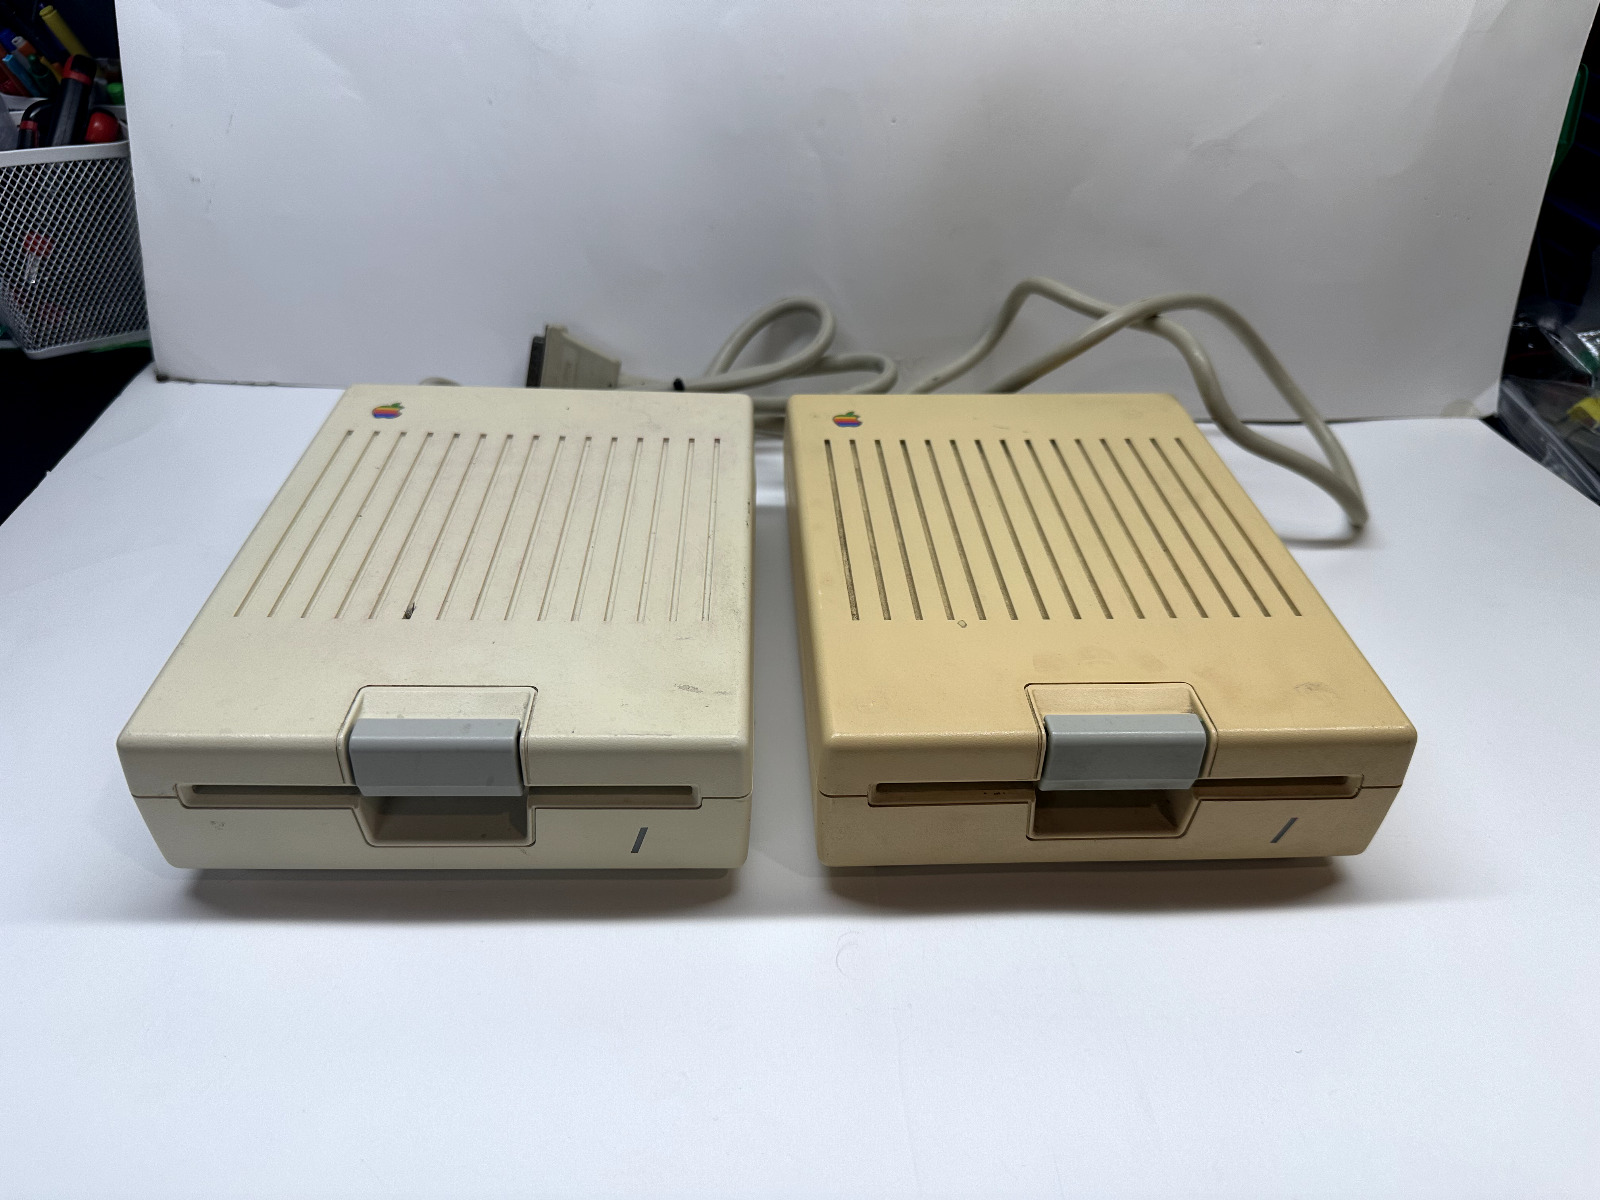 Vintage Apple Disk Drive IIc 5.25” A2M4050 Floppy Disk Drives - UNTESTED AS IS